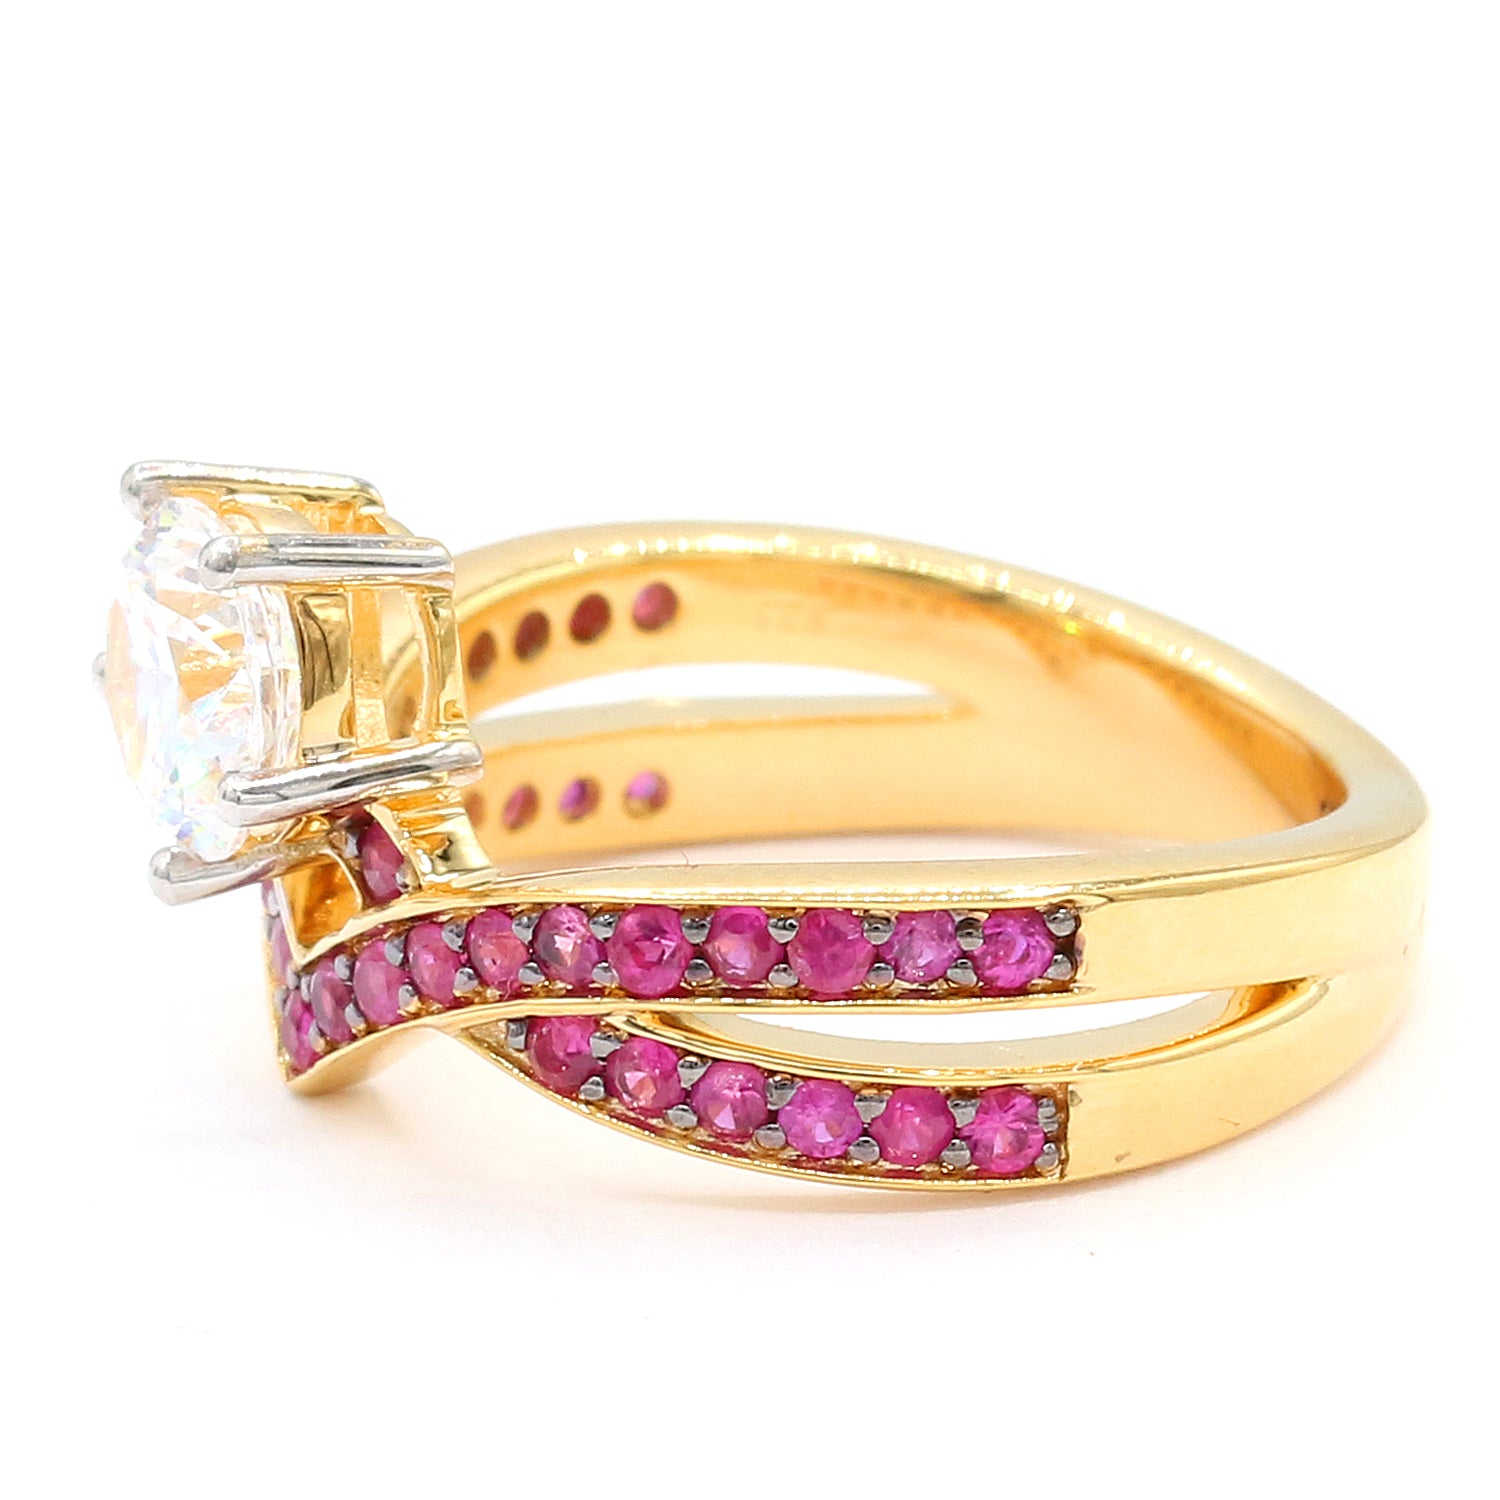 Limited Edition Gems en Vogue Luxe, One-of-a-kind IGI Certified Over 1ct Lab Grown Diamond & Ruby Ring